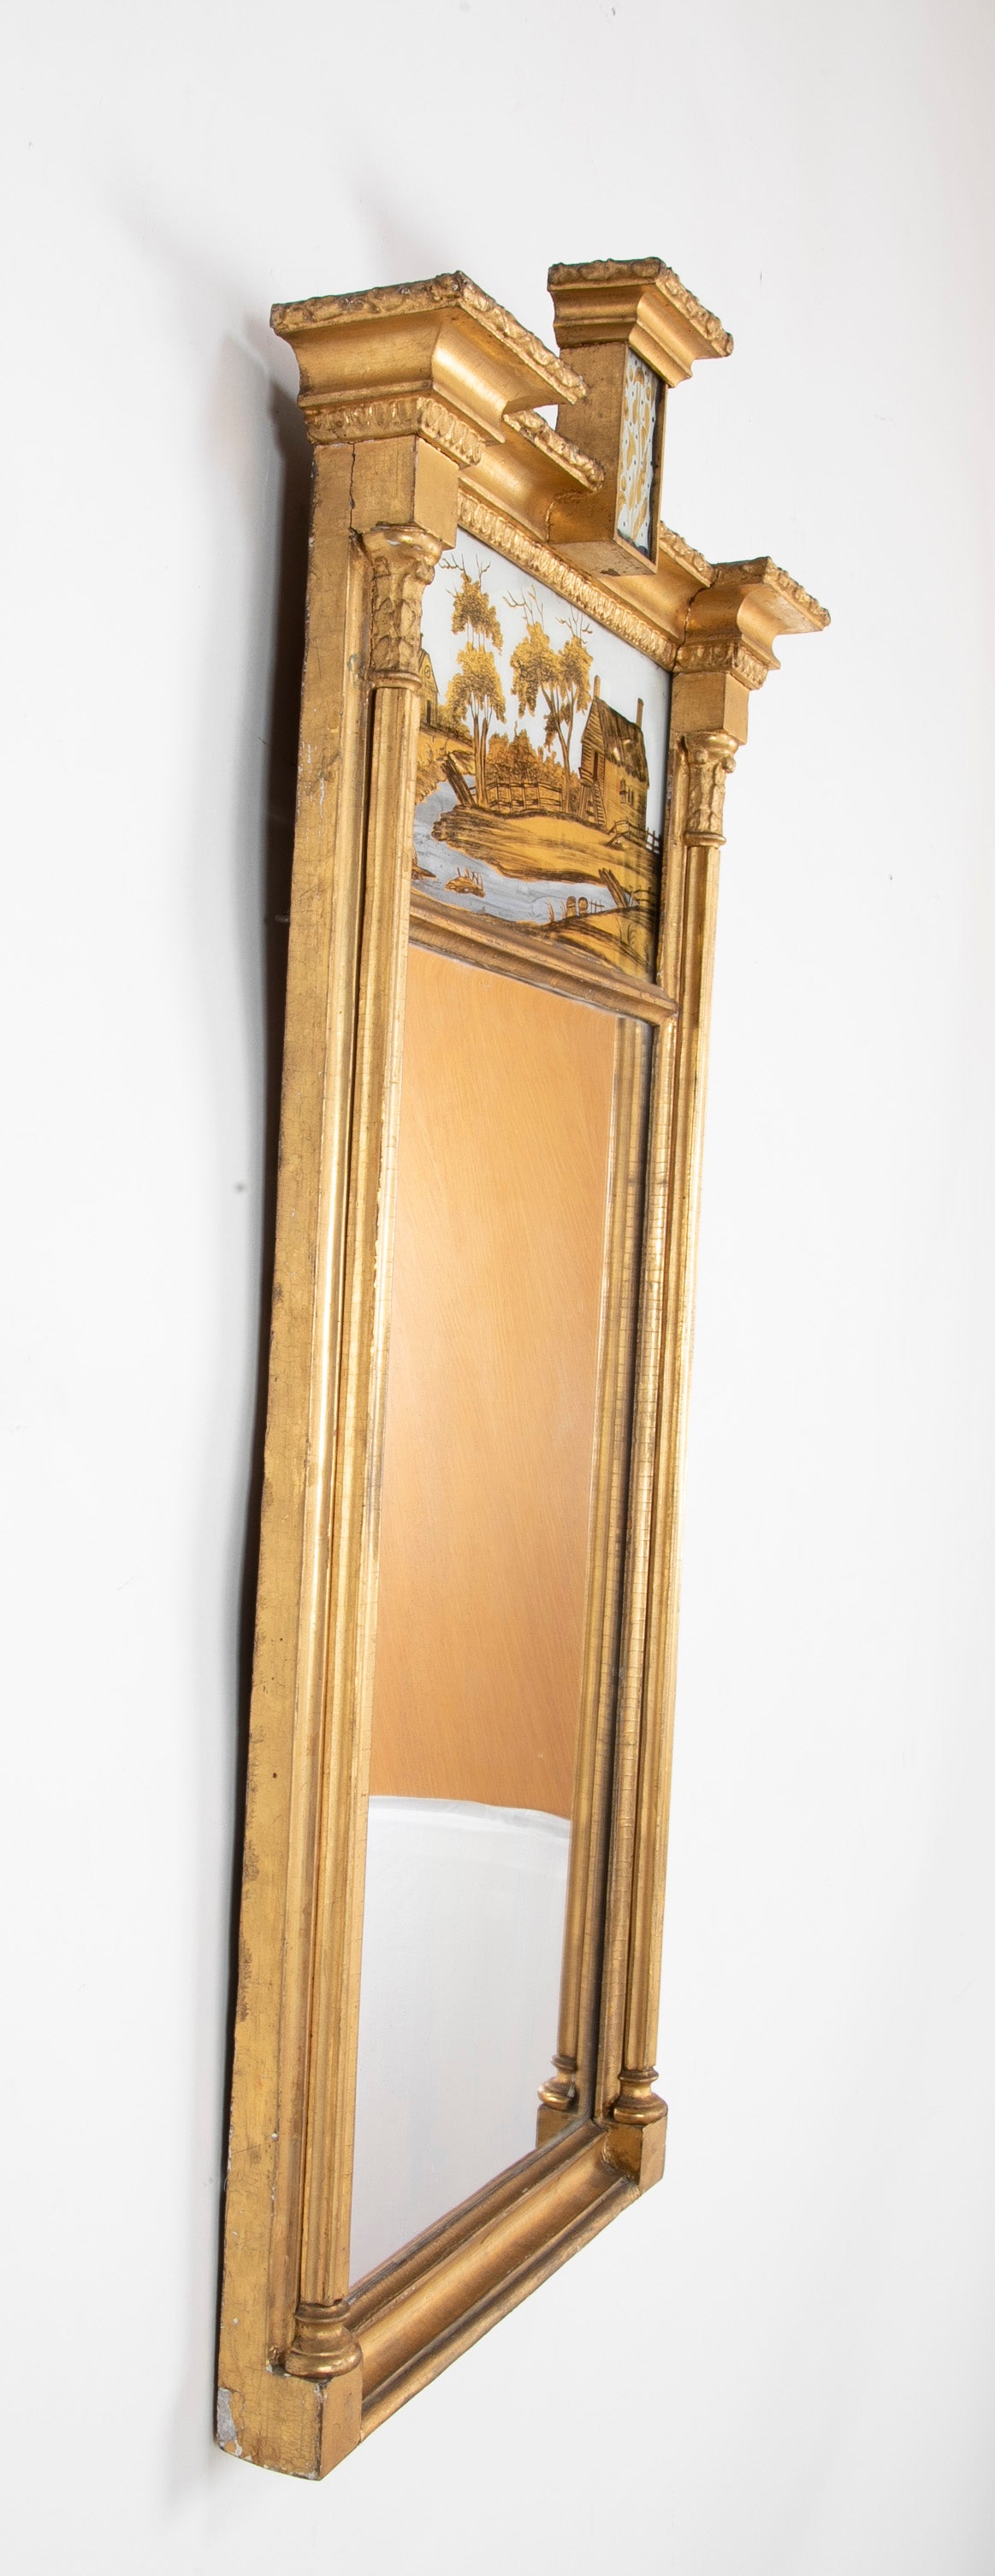 American Eglomise Mirror from Albany, NY with Unusual Small Eglomise Panel